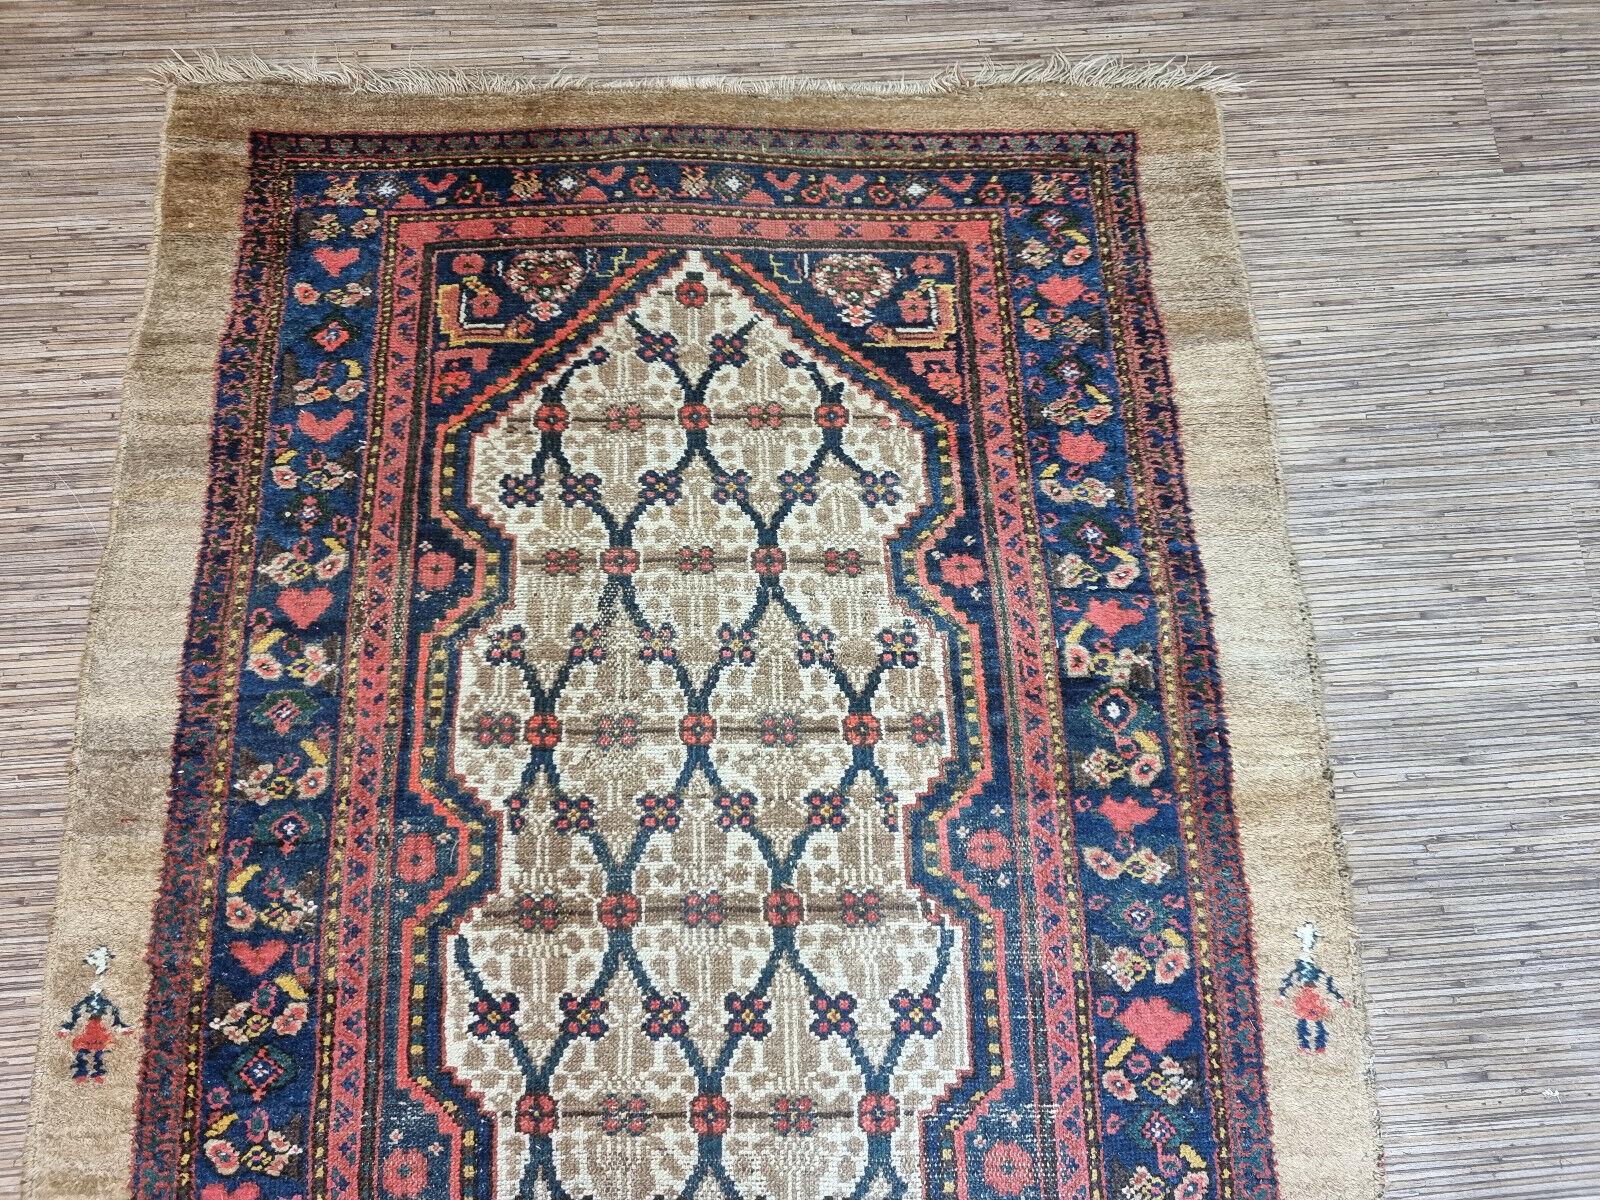 Early 20th Century Handmade Antique Persian Style Camel Hair Runner Rug 4' x 14.4', 1900s - 1D79 For Sale